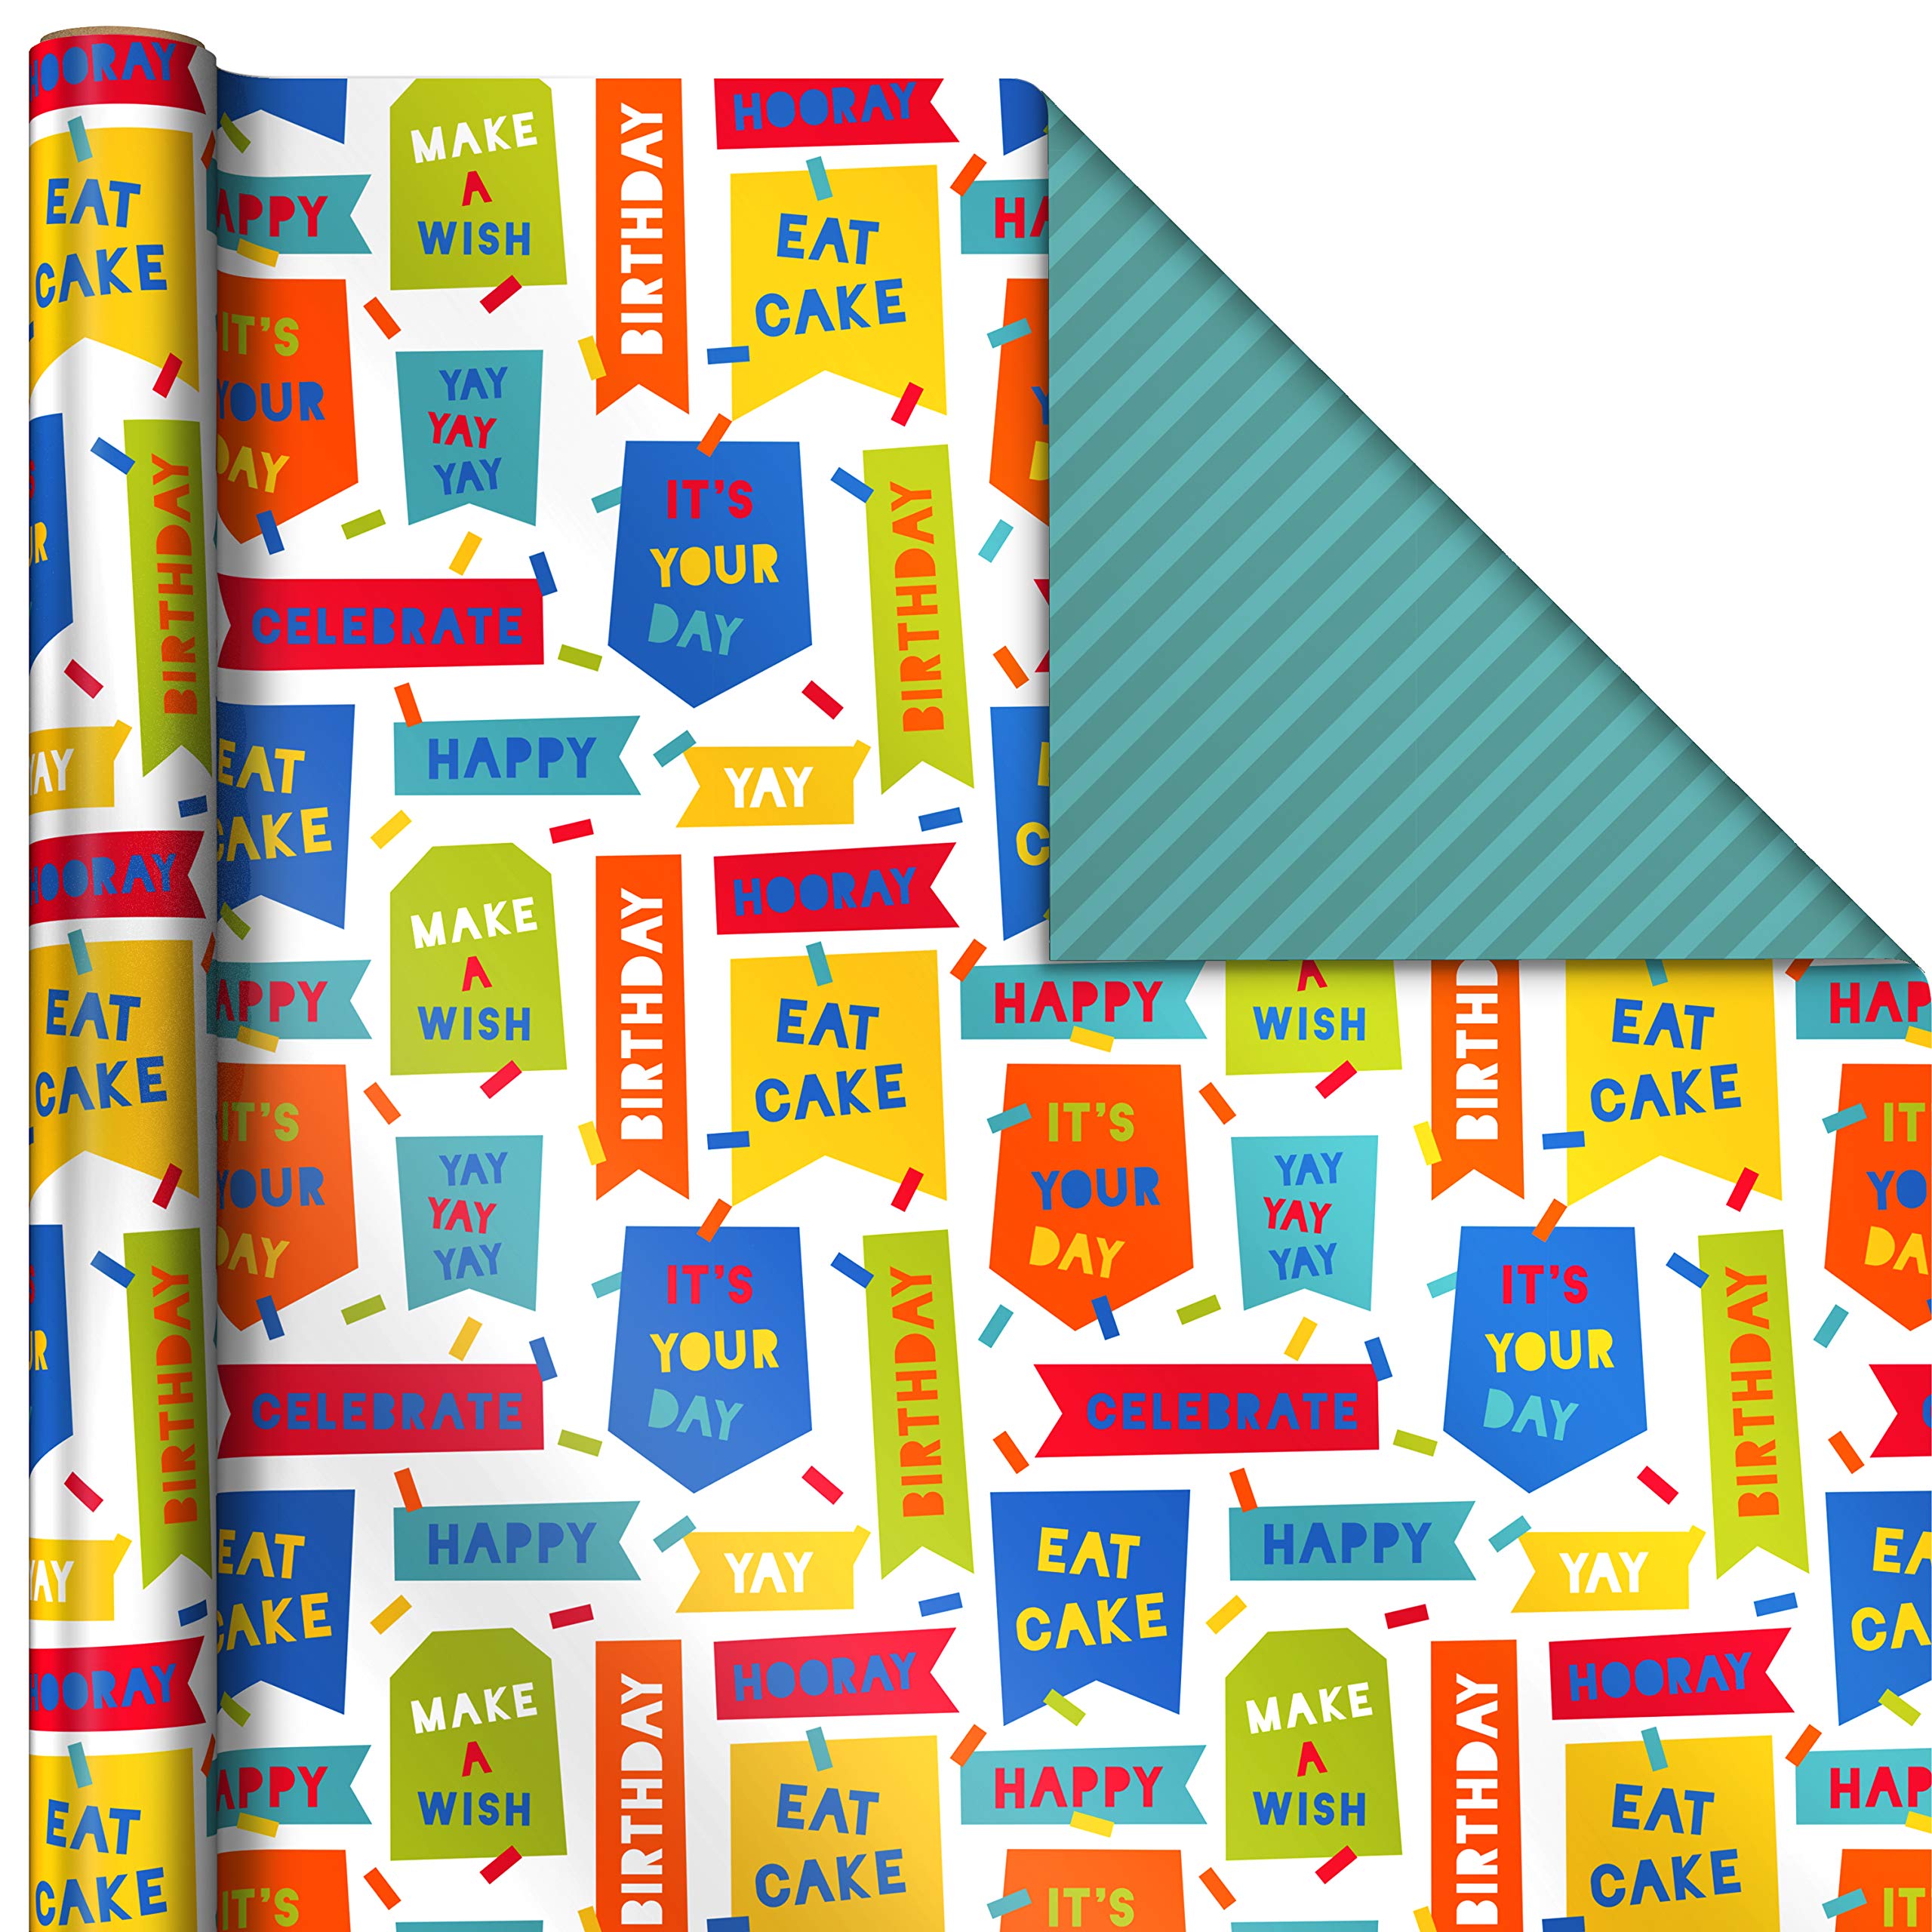 Hallmark Reversible Birthday Wrapping Paper Bundle (3-Pack: 75 sq. ft. ttl.) Balloons, Bright Green, Teal Stripes, White Polka Dots on Red